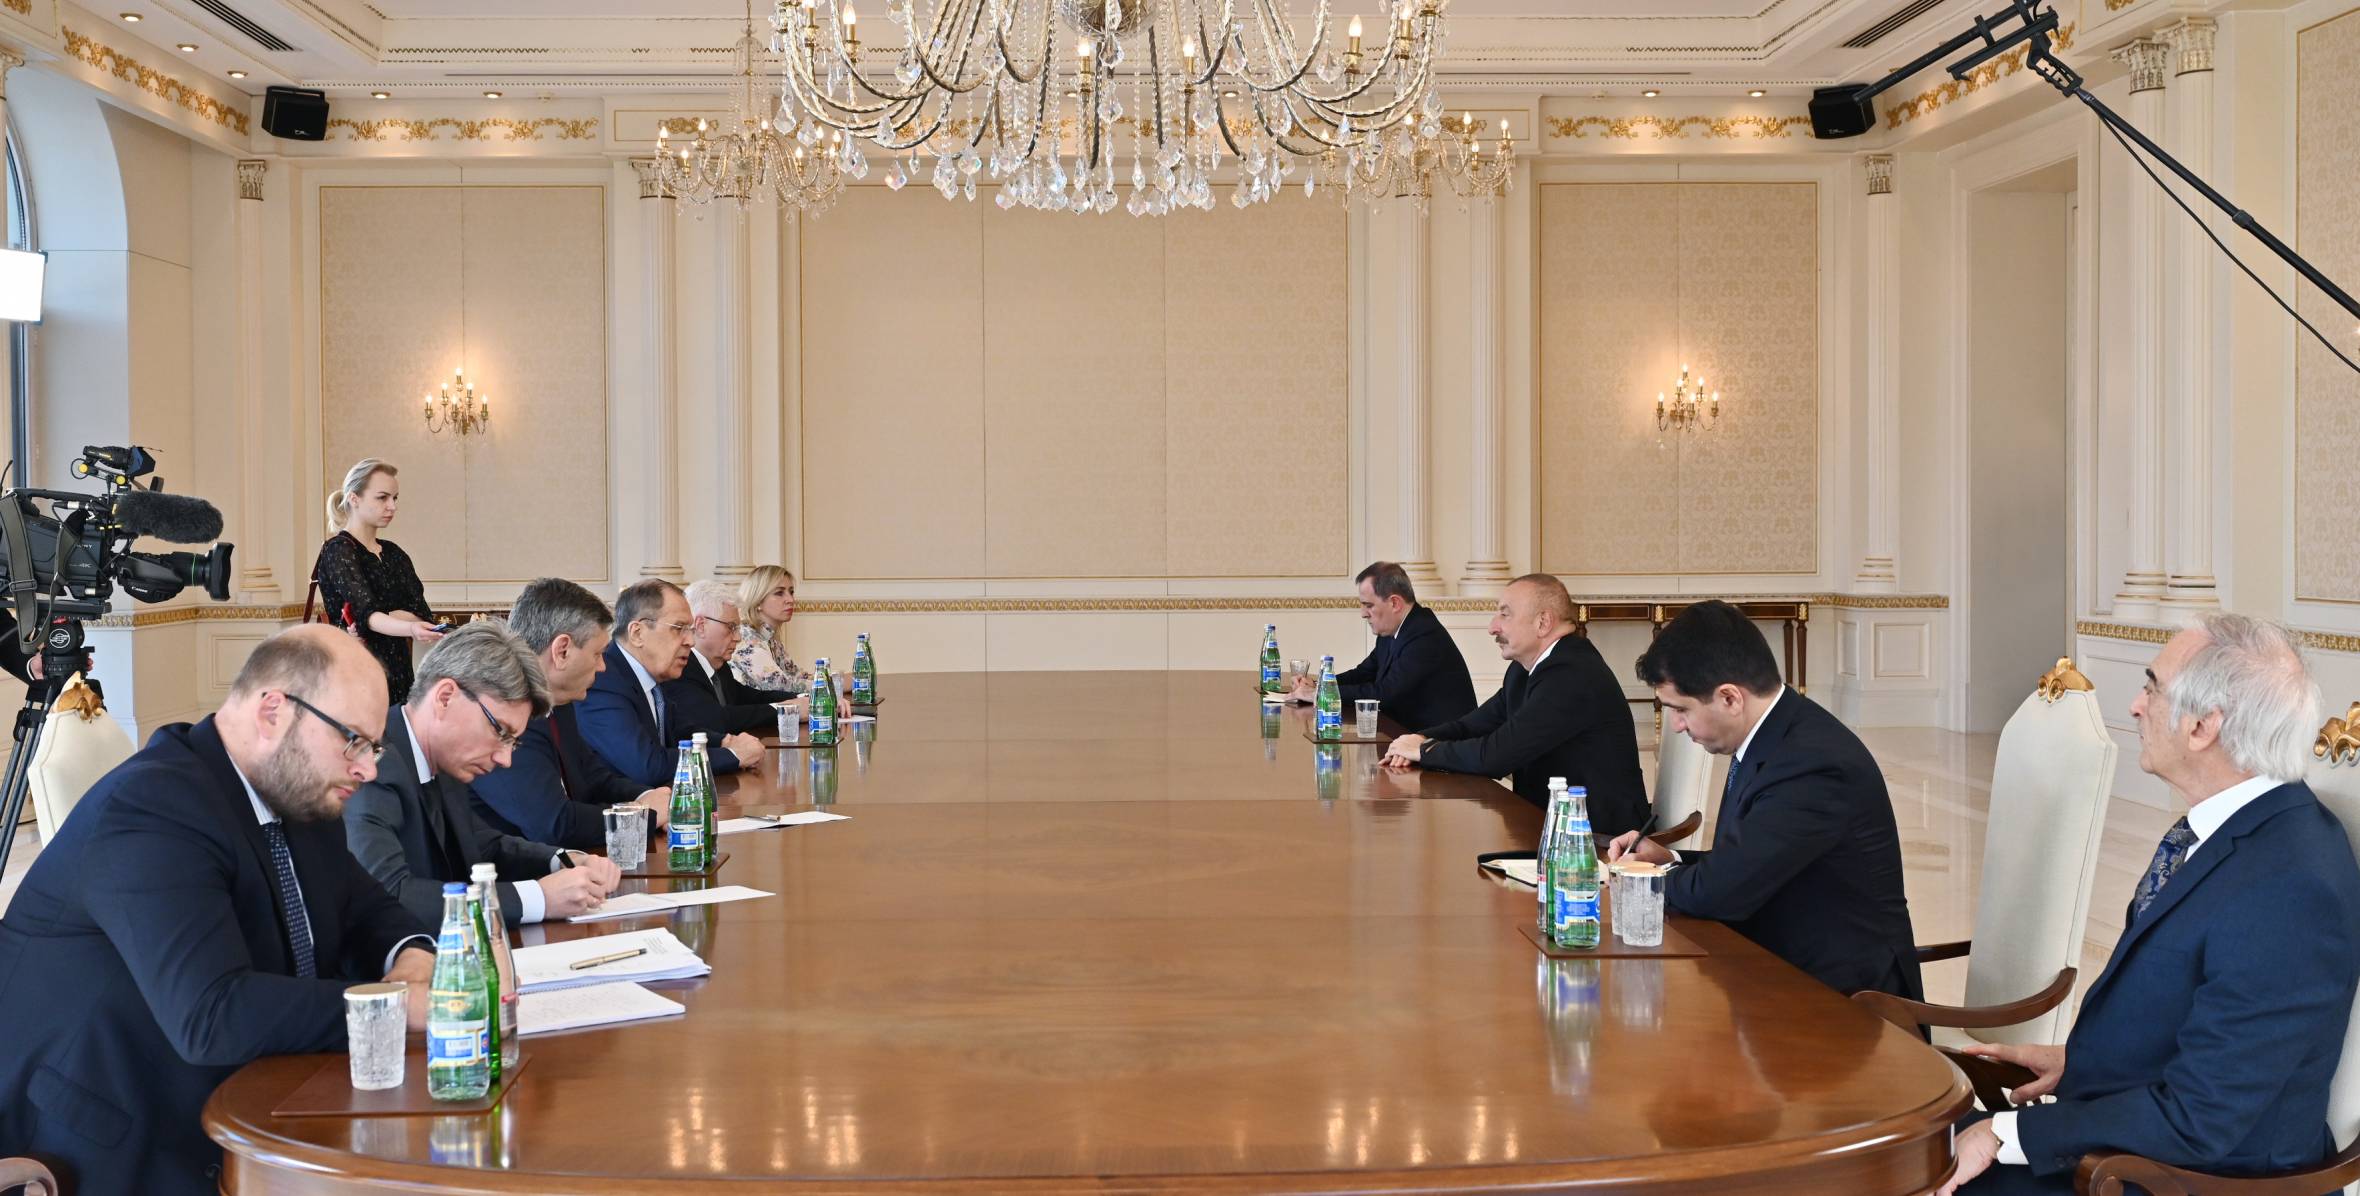 Ilham Aliyev received Foreign Minister of Russia Sergey Lavrov